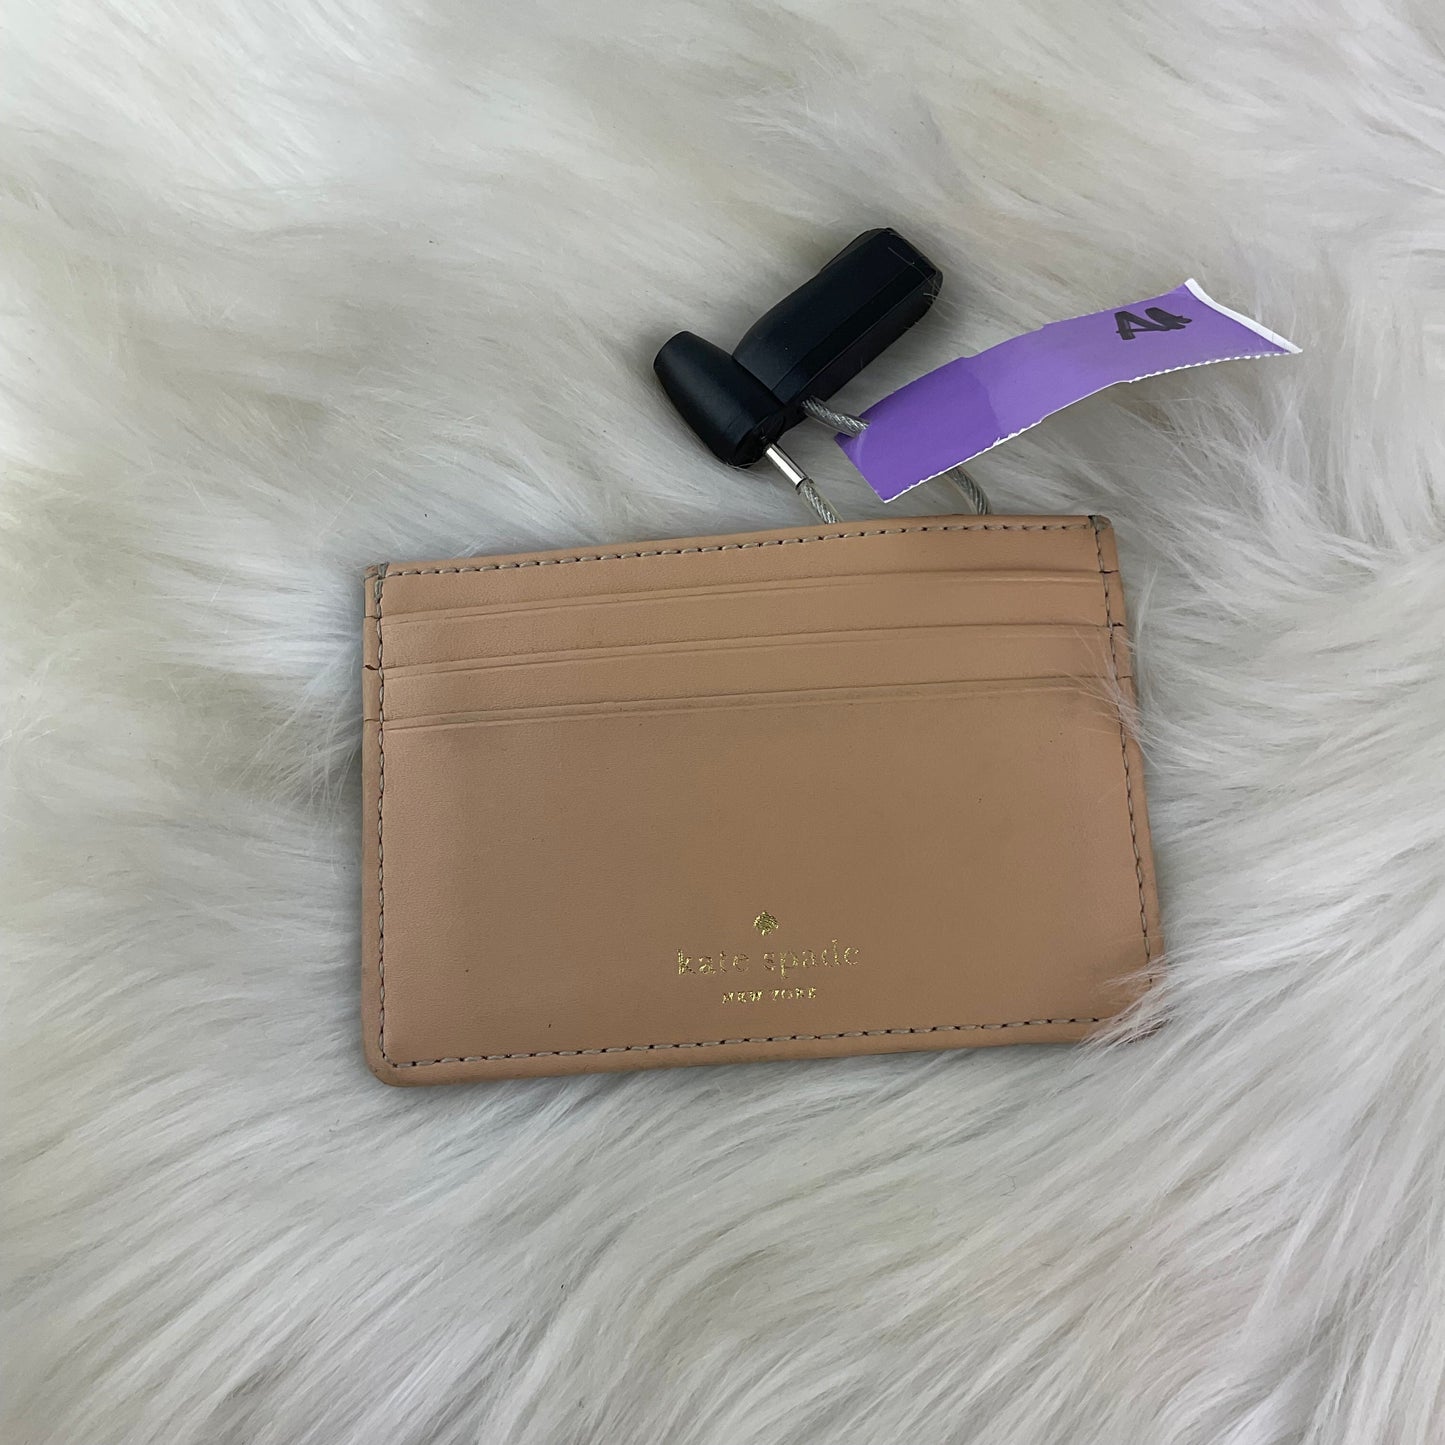 Wallet Kate Spade, Size Small